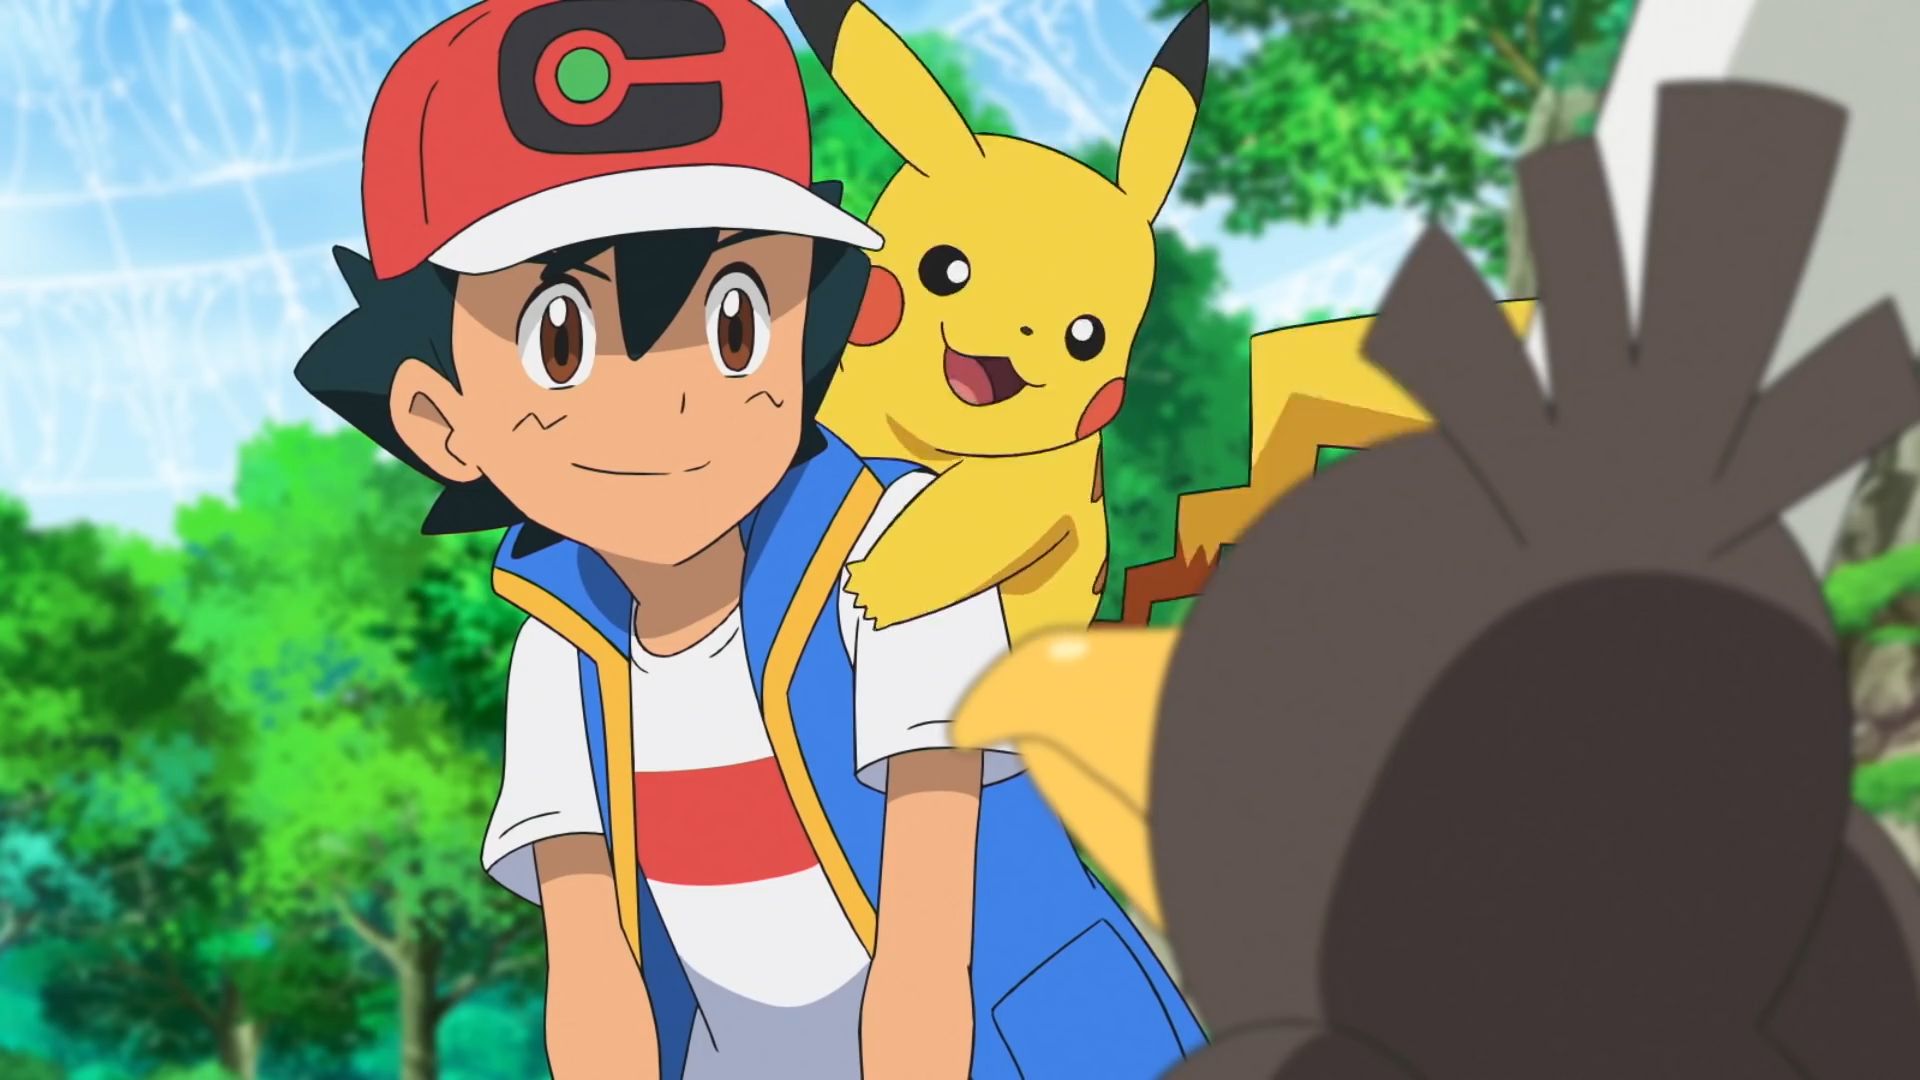 Pokémon Reveals Ending For Ash And Pikachu As Their Final Episode Airs